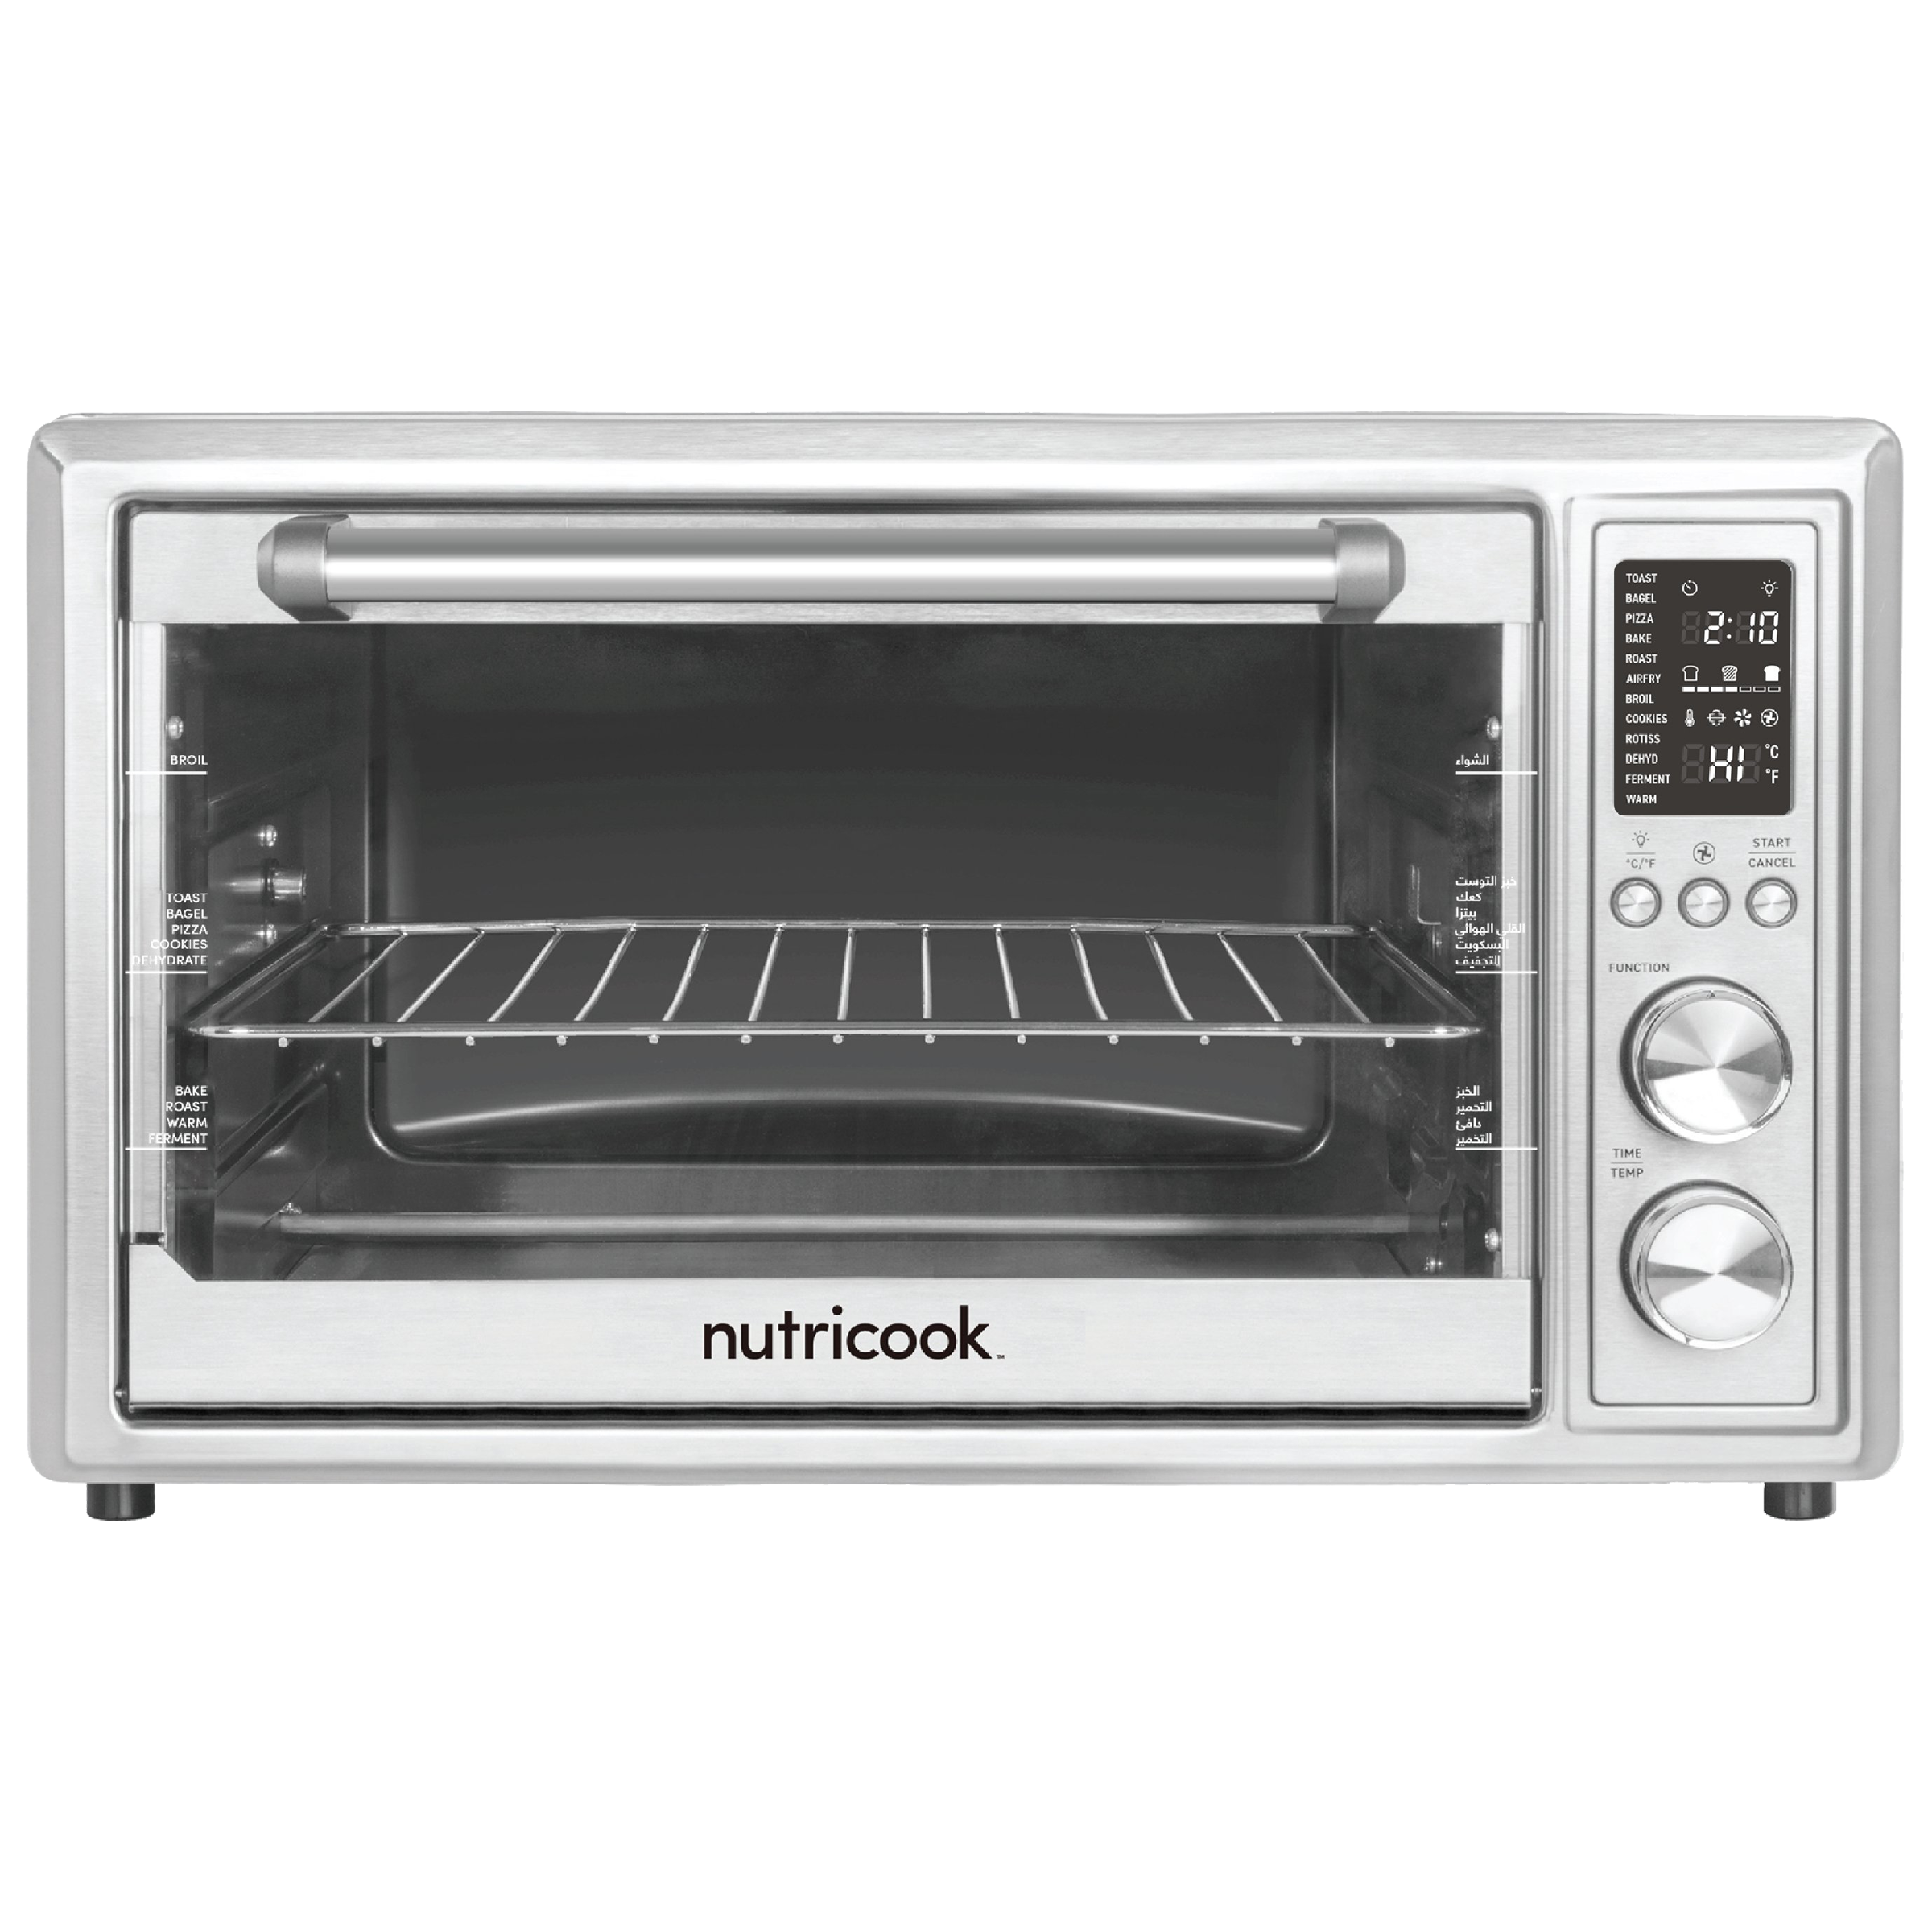 Nutricook 30 Litres Convection Oven (Smart Air Fryer, SAFO30, Silver)_1